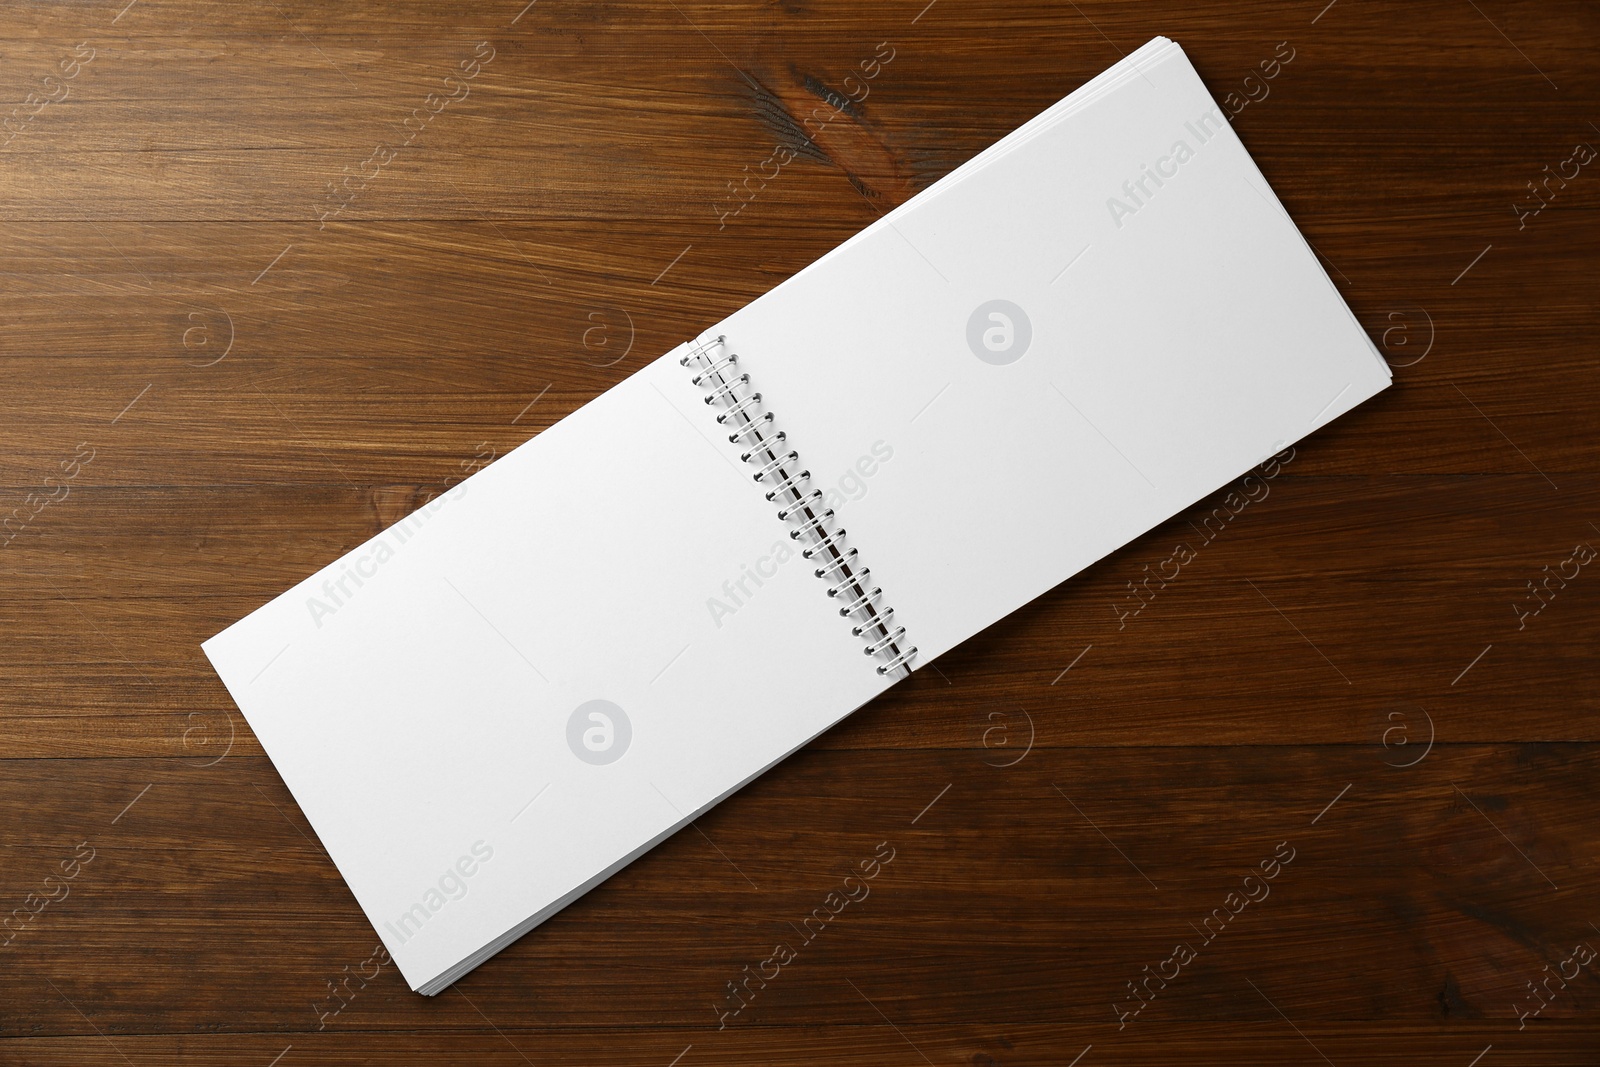 Photo of Blank paper brochure on wooden table, top view. Mockup for design